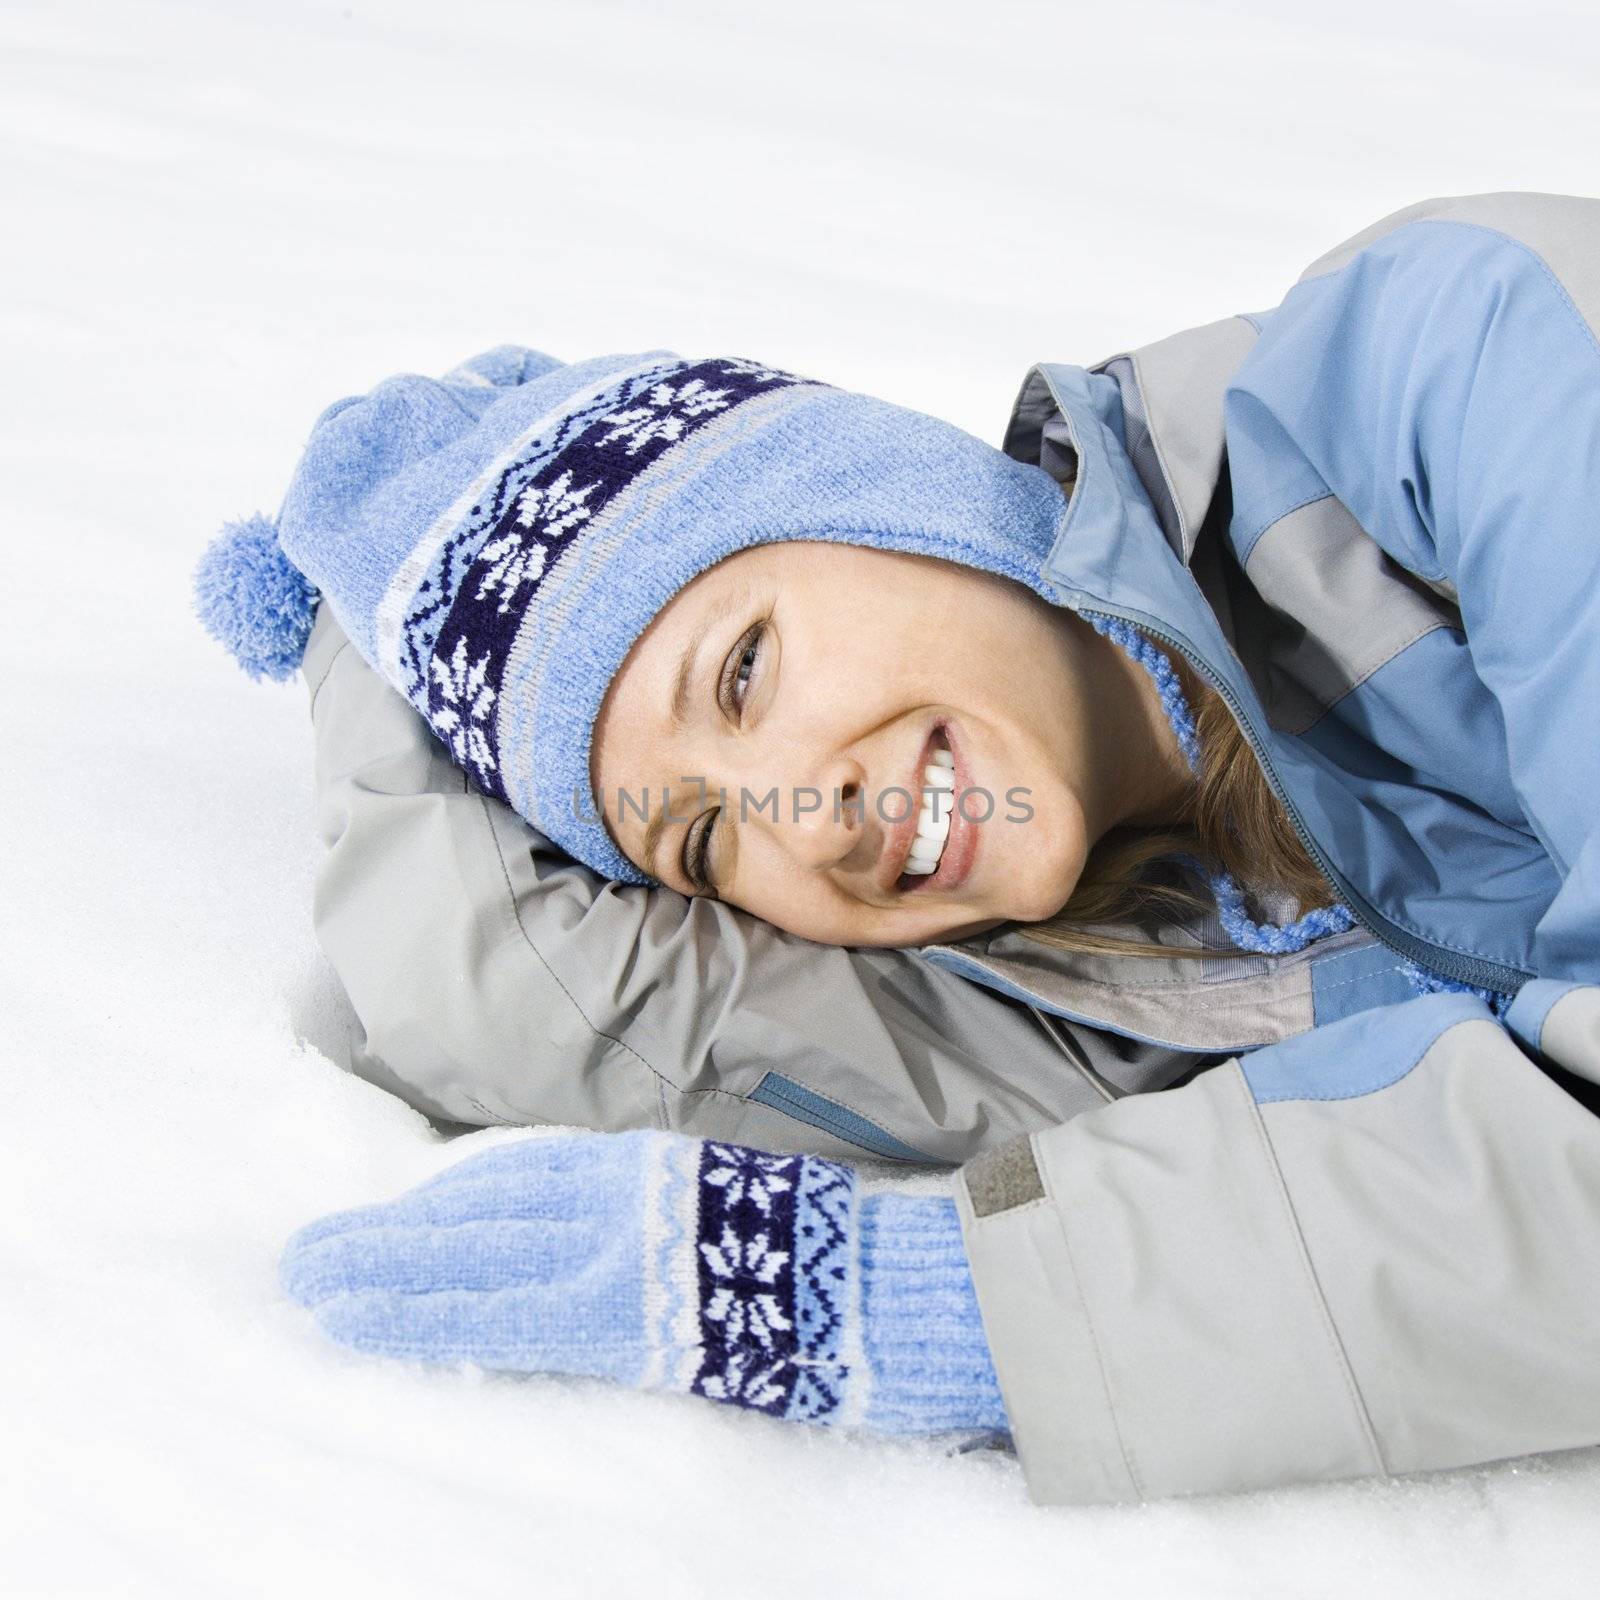 Attractive smiling mid adult Caucasian woman wearing blue ski clothing lying in snow looking at viewer.